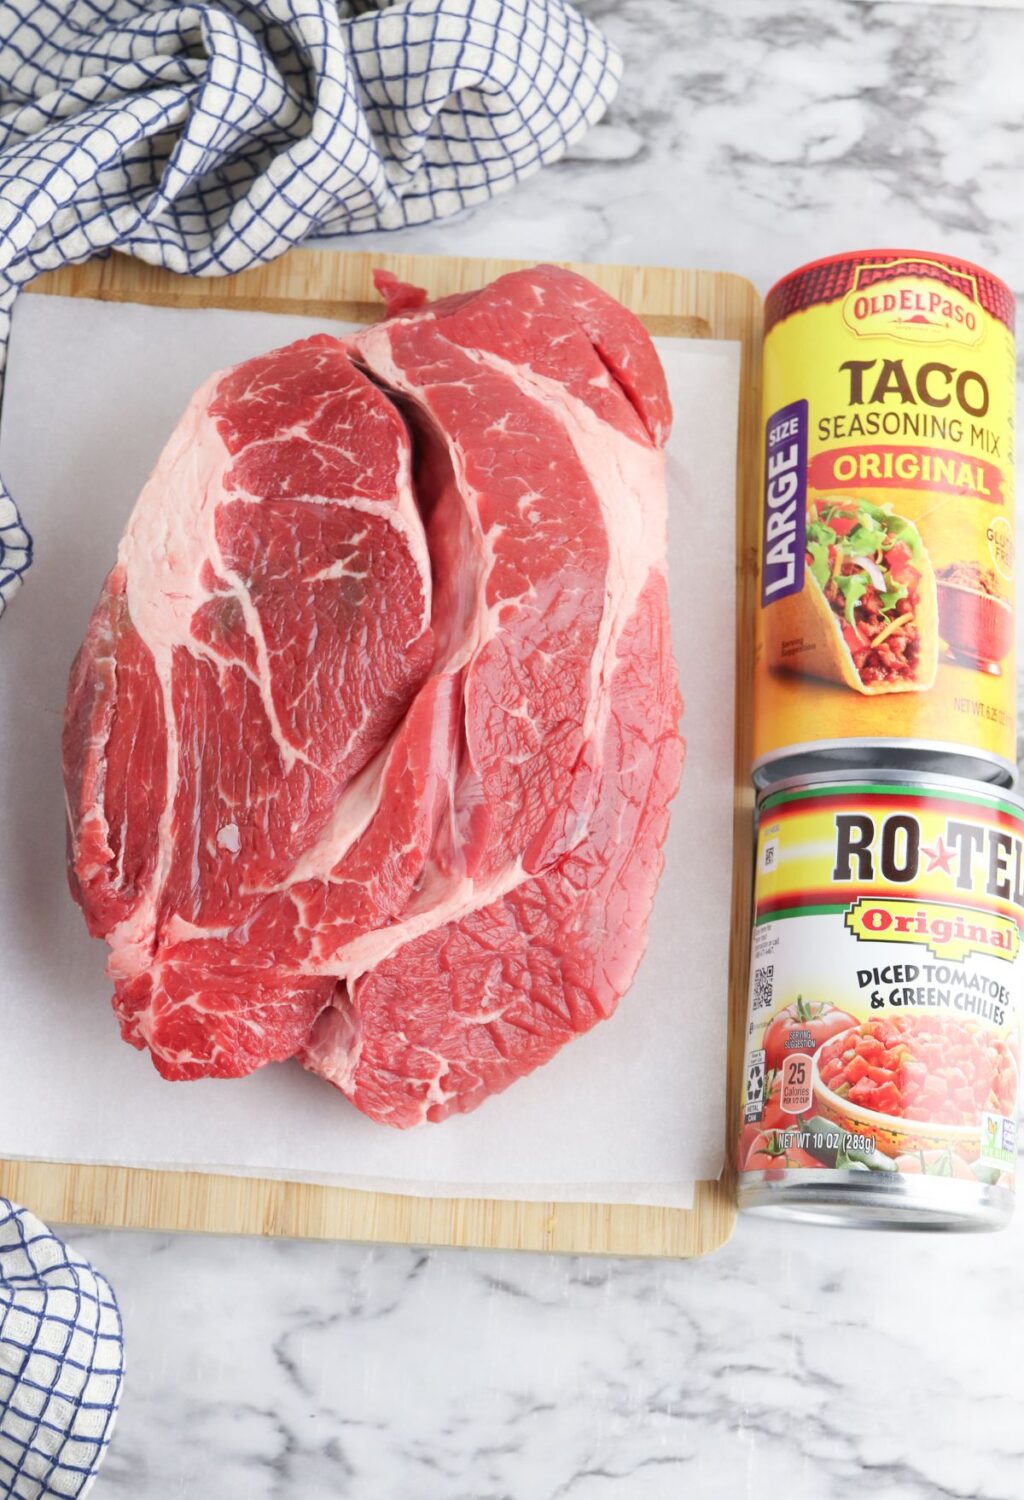 A cutting board with meat, taco seasoning, and a can of taco sauce.